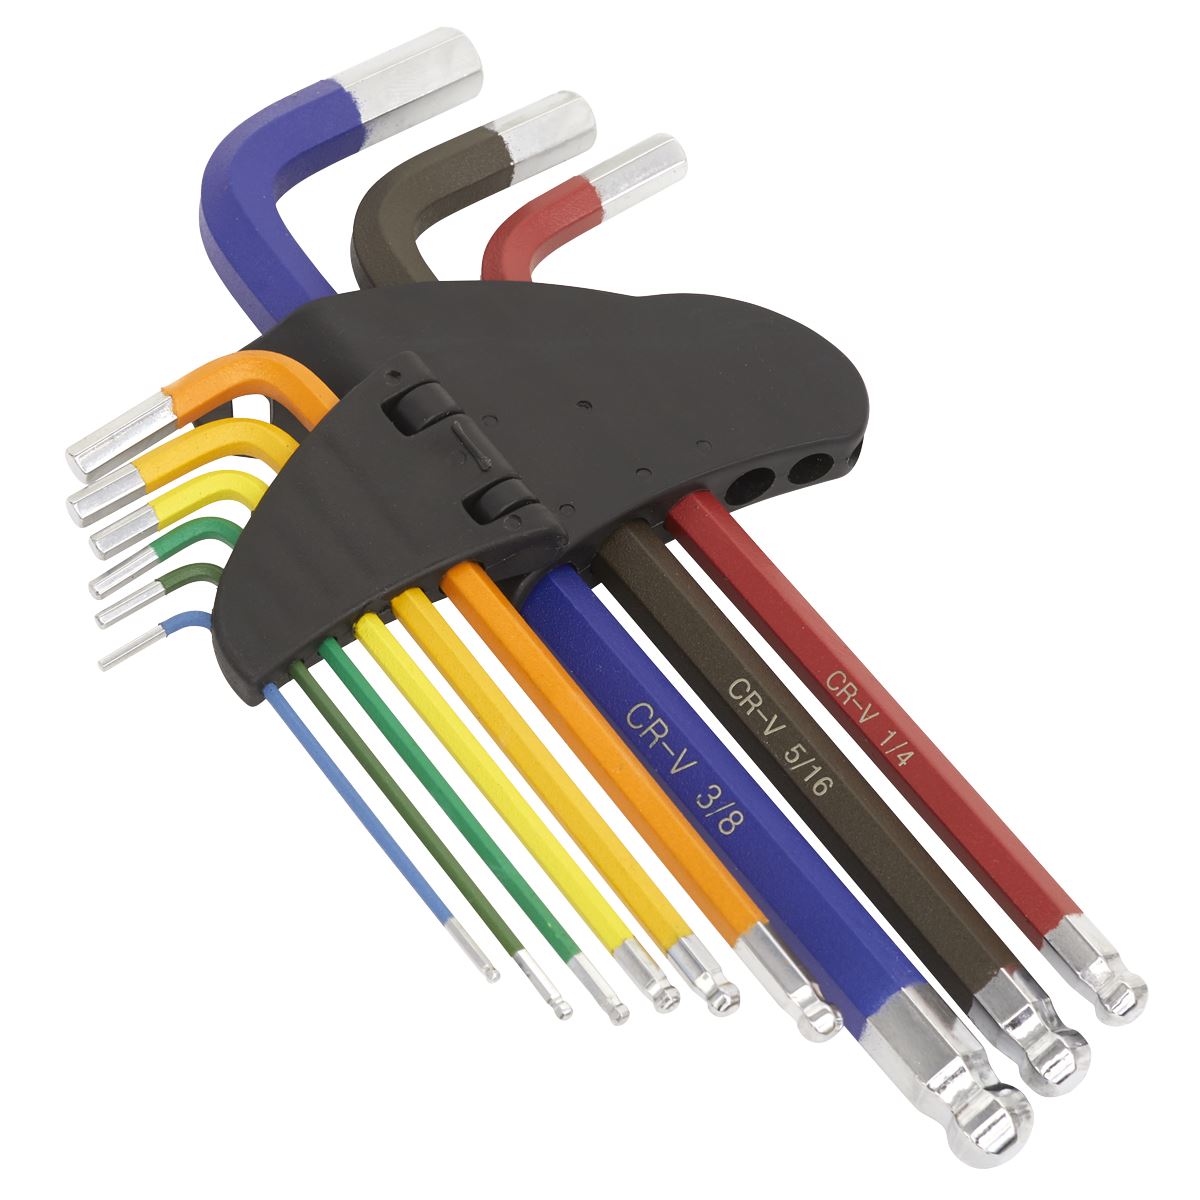 Sealey Premier Ball-End Hex Key Set 9pc Long Colour-Coded Imperial